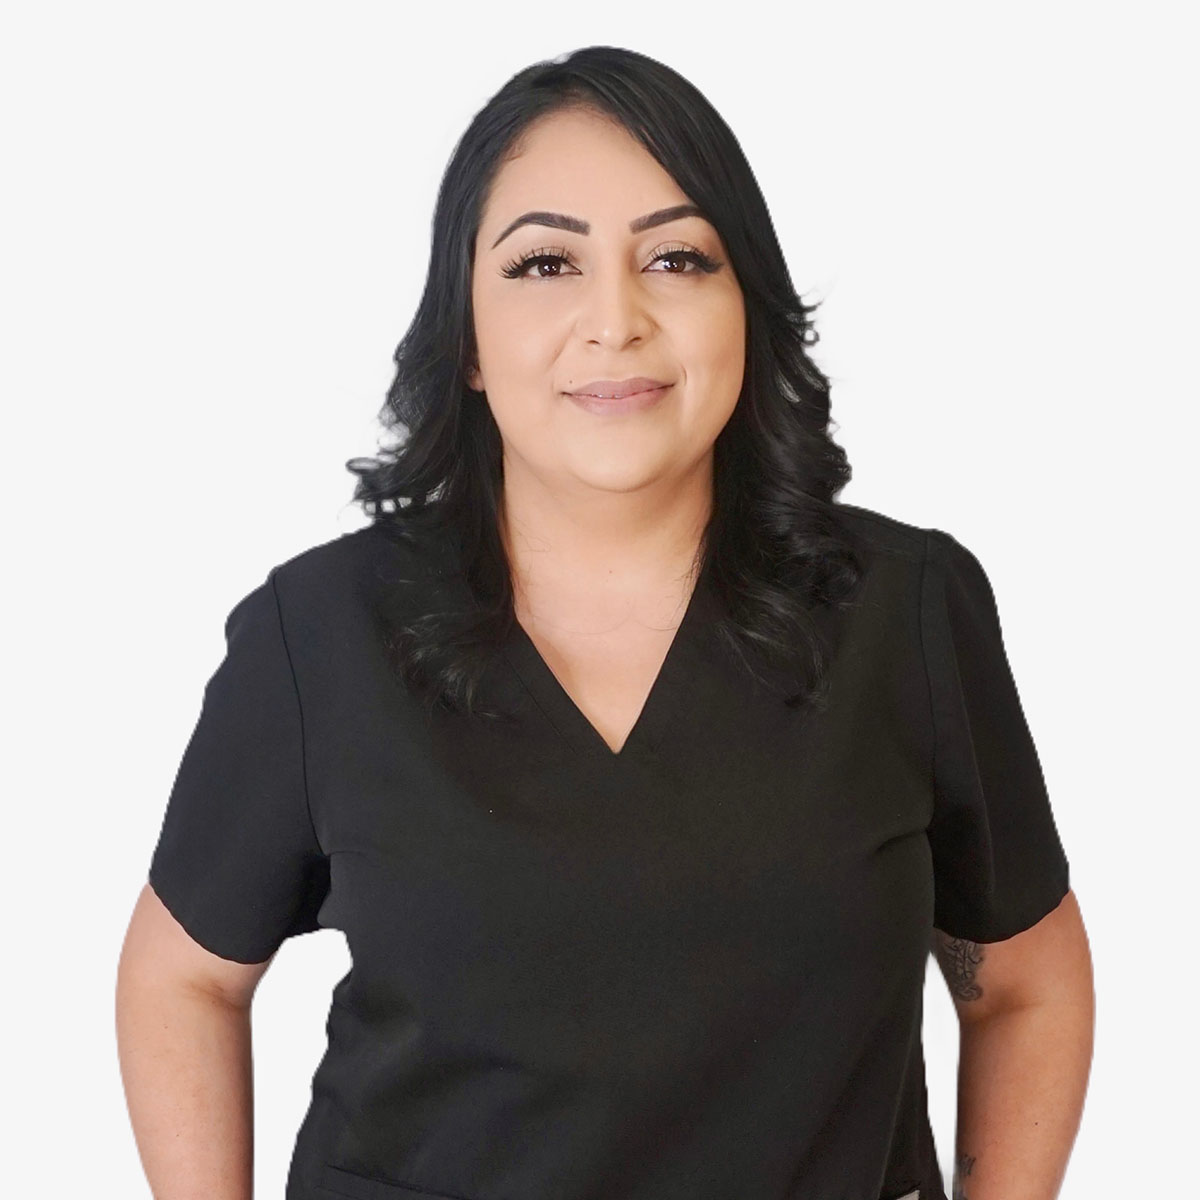 Stephanie Hernandez, Medical Assistant at Southern California Multi-Specialty Center serving Los Angeles